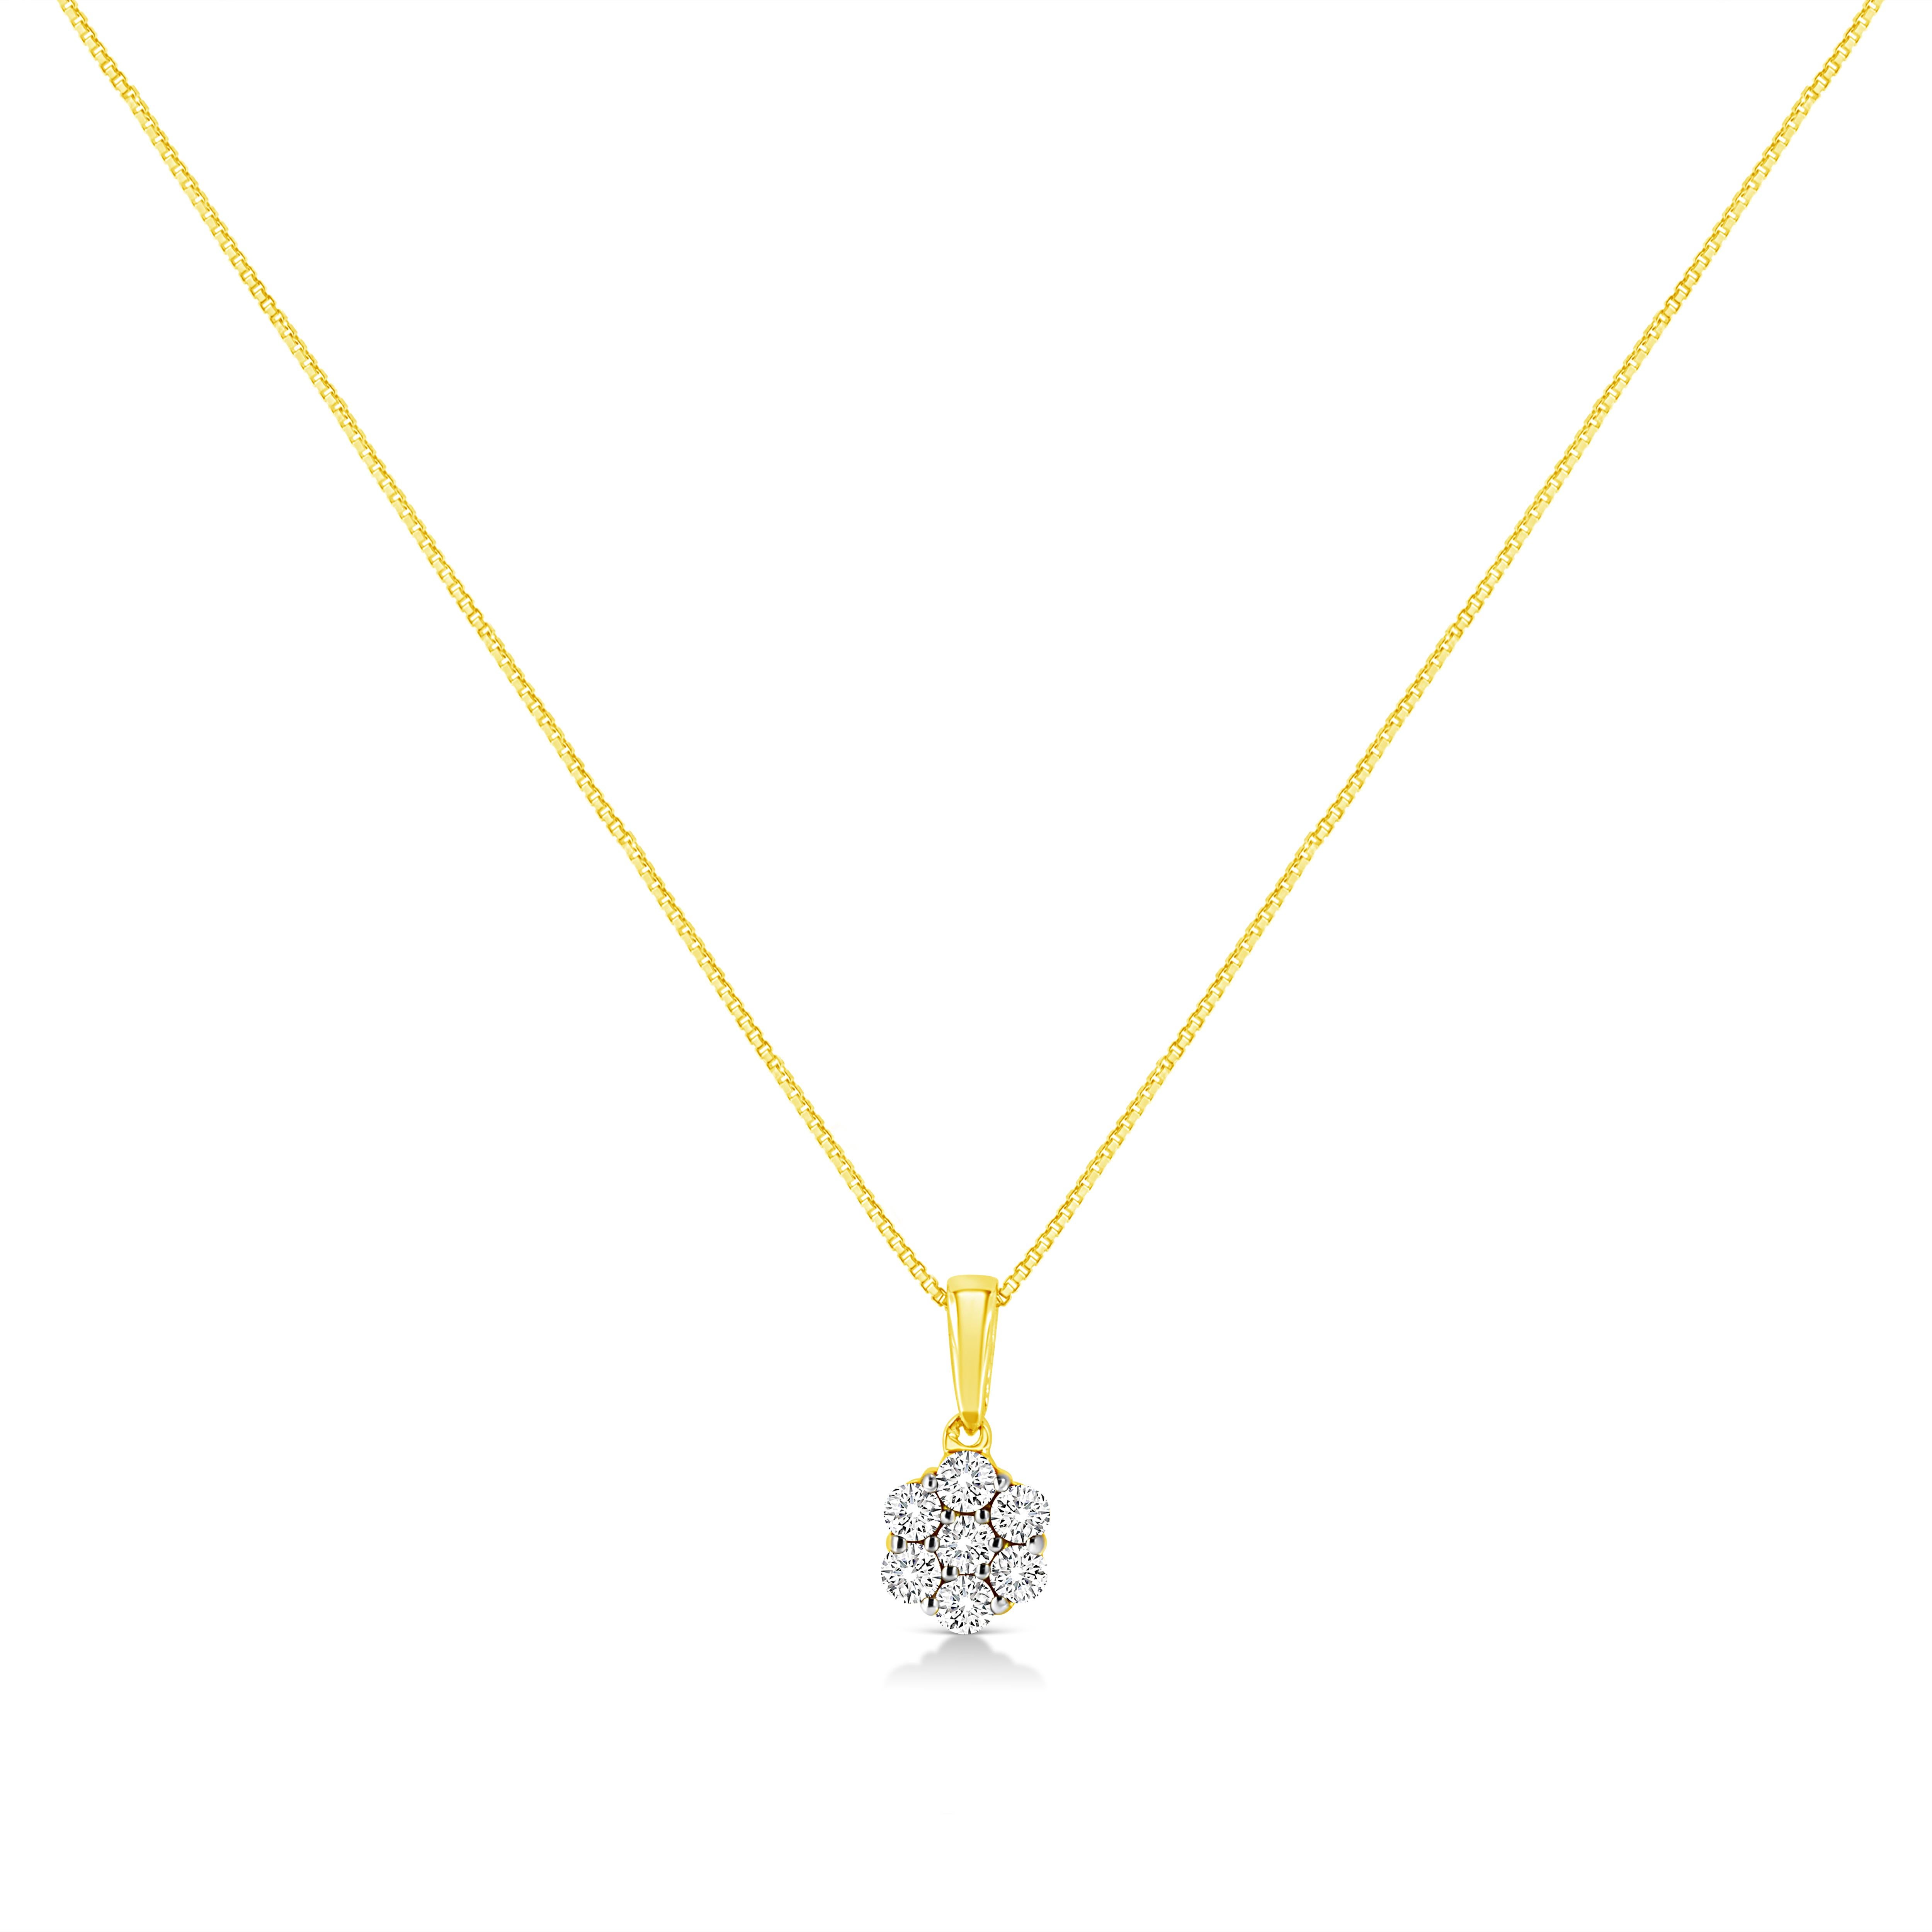 Add a floral touch to your everyday jewelry wear with this chic 1/4 cttw diamond cluster pendant. This necklace boasts 7 natural, round-cut diamonds in a flower motif that is created in genuine 14k Yellow Gold. The pendant hangs off of a 14k Yellow